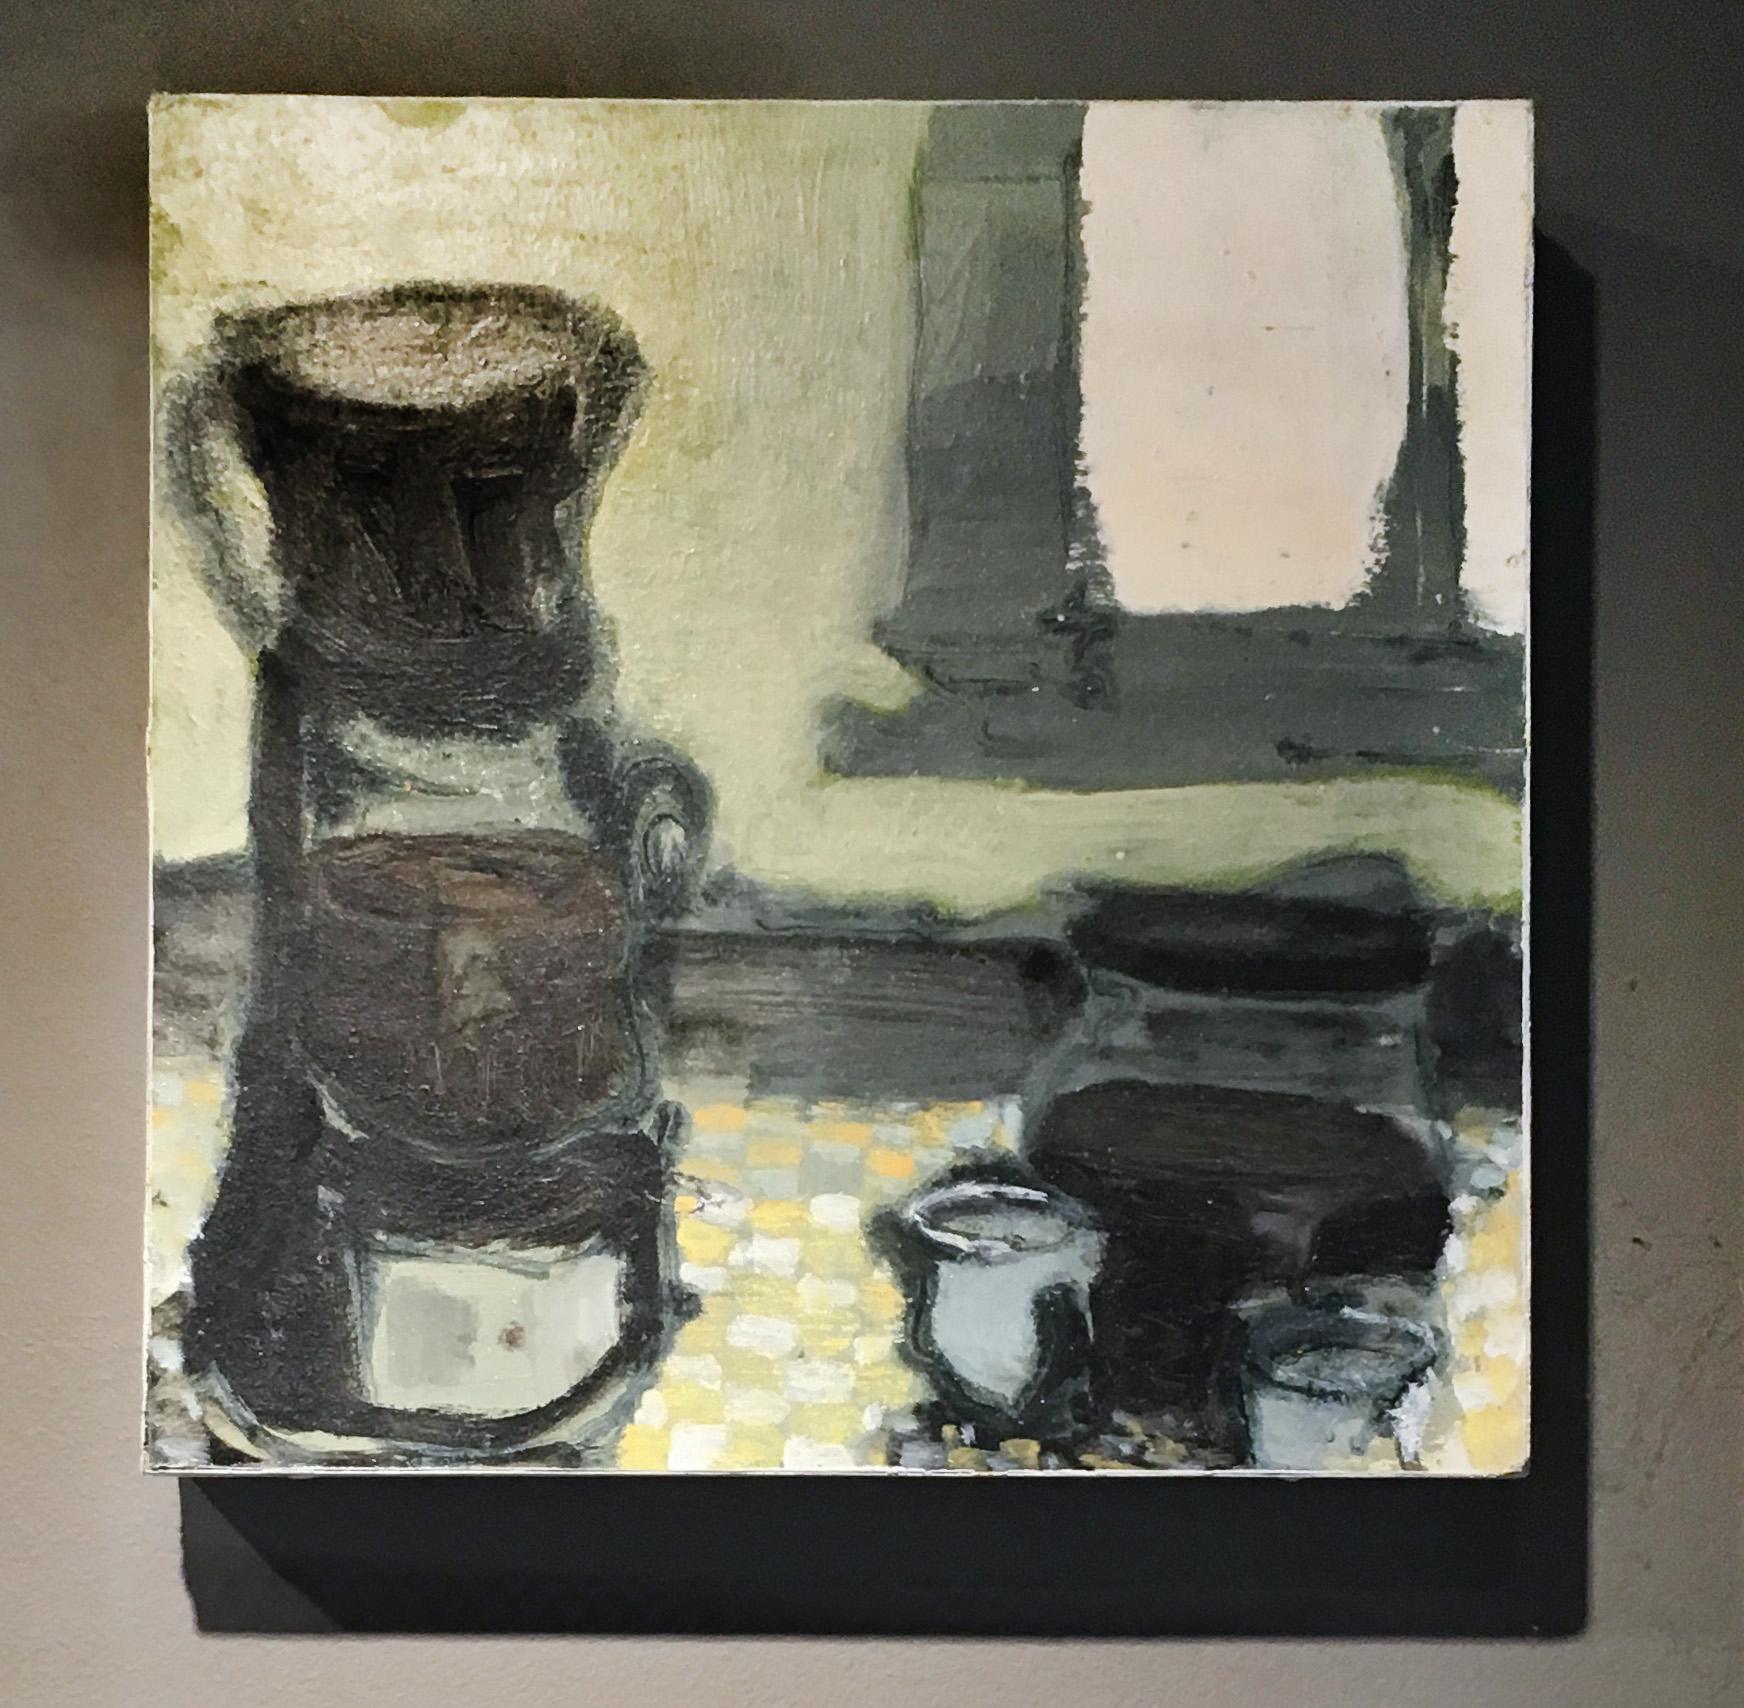 Coffee (12 inch Contemporary Still Life of Coffee Pot on Kitchen Countertop) - Painting by David Konigsberg